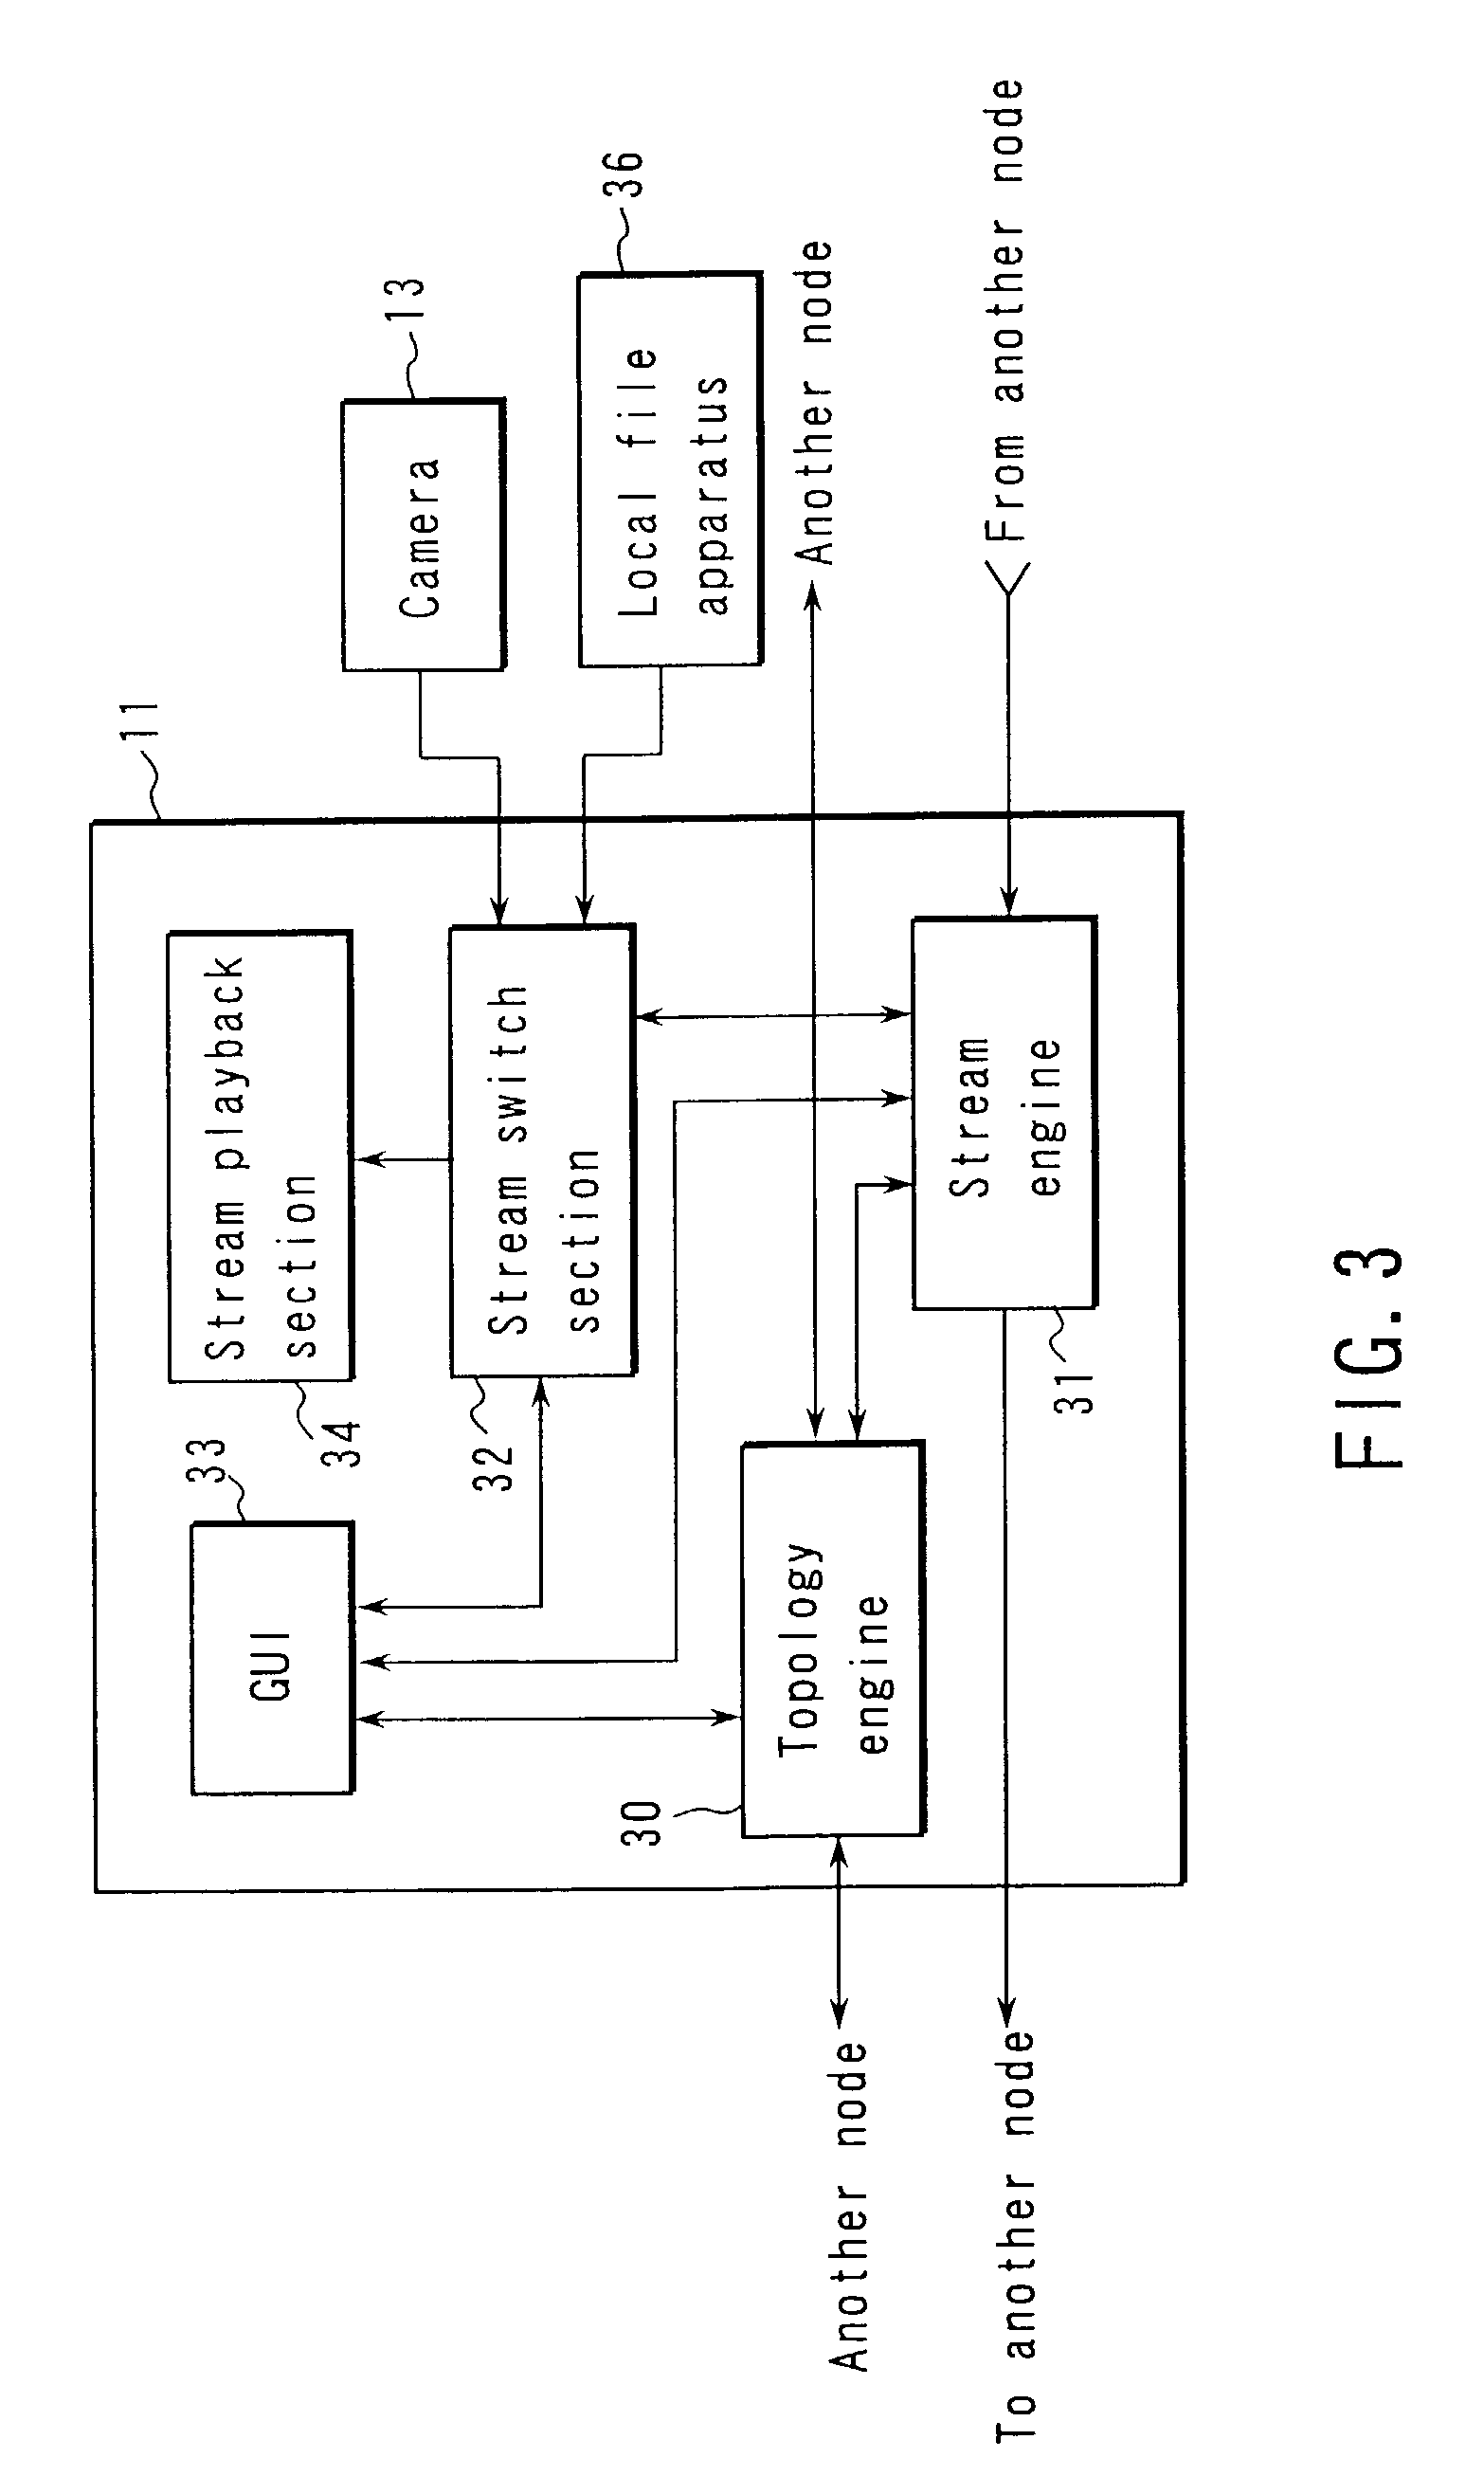 Method and system for distributing data in a network